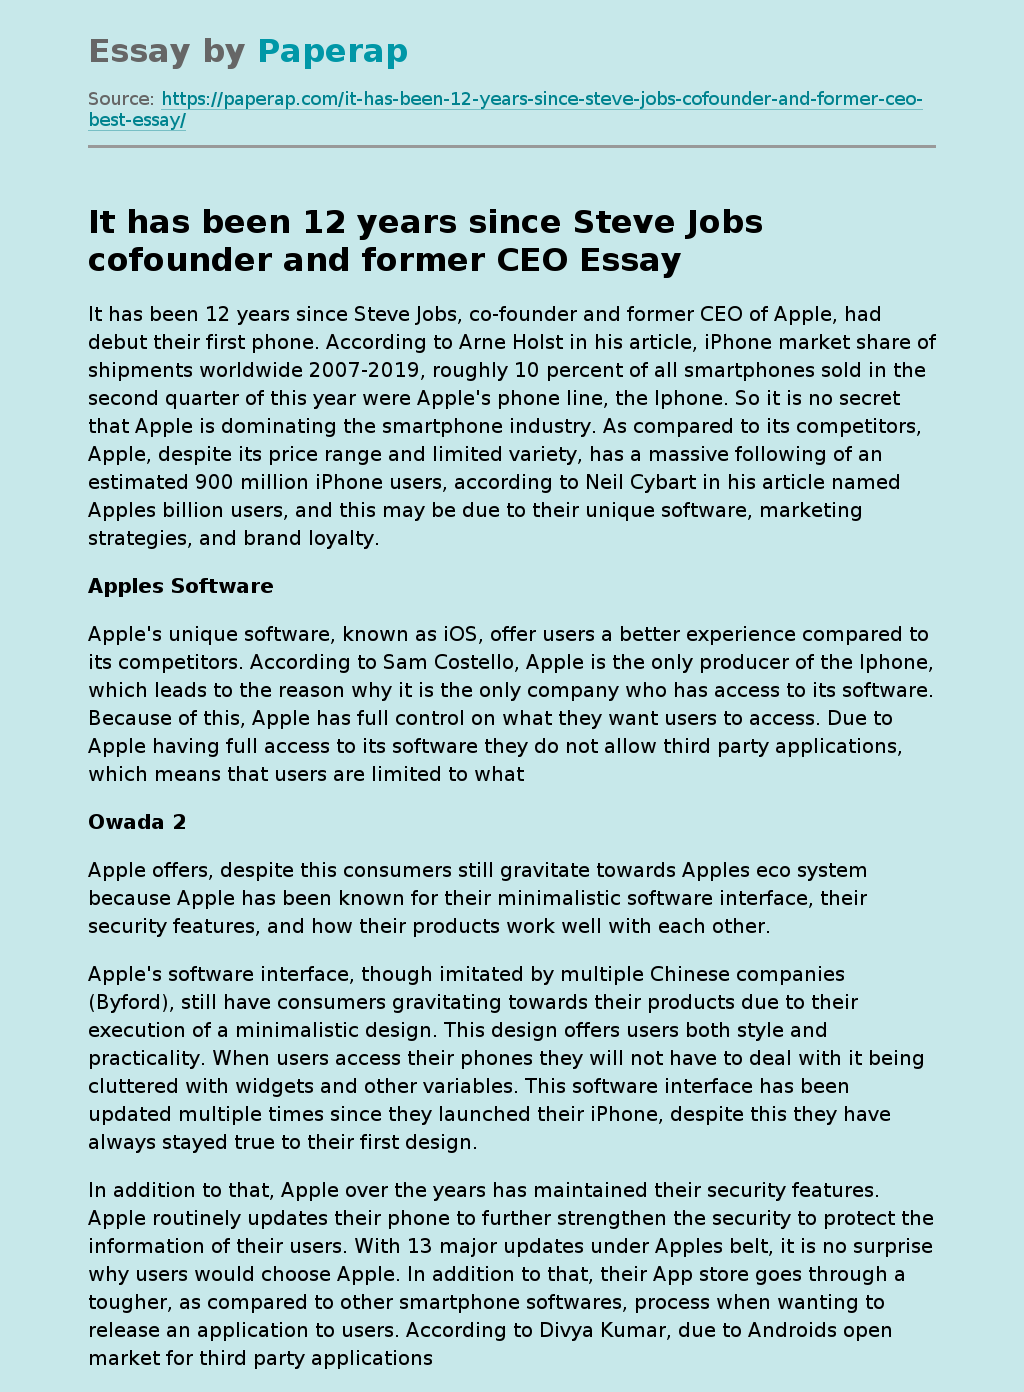 It has been 12 years since Steve Jobs cofounder and former CEO